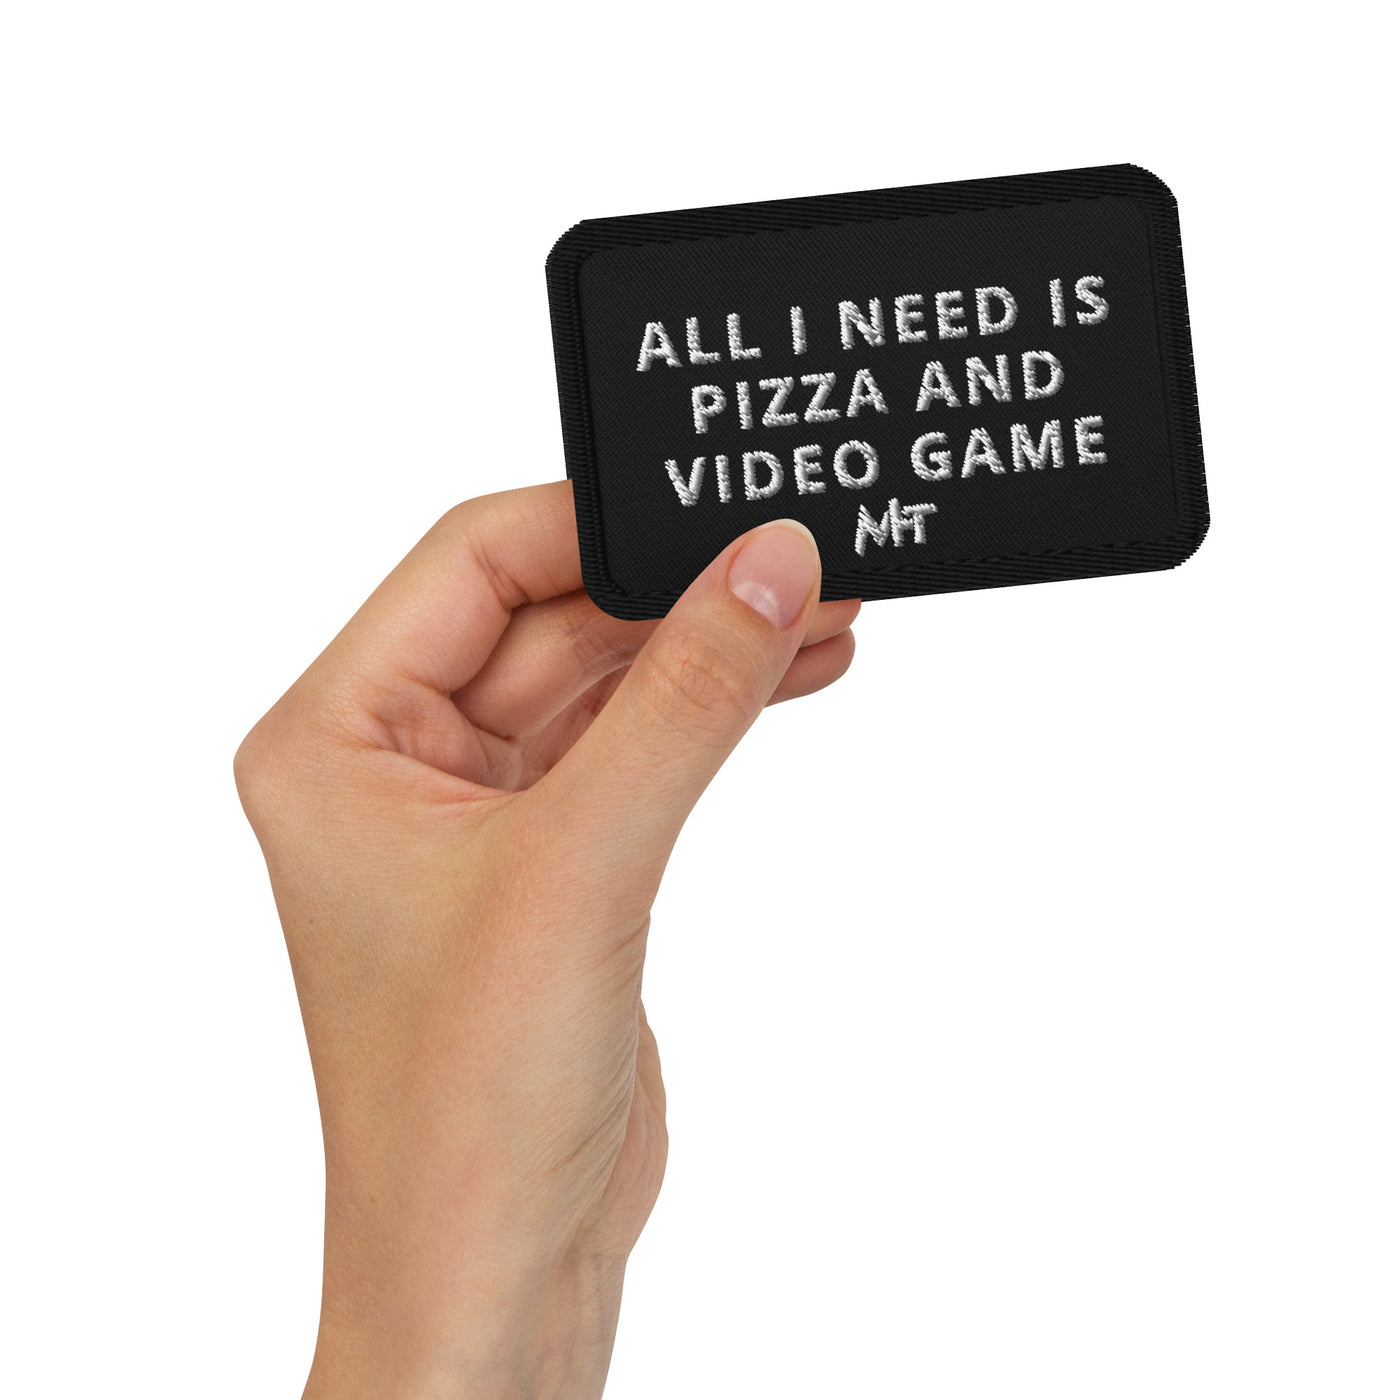 All I need is Pizza and Video Games - Embroidered patches